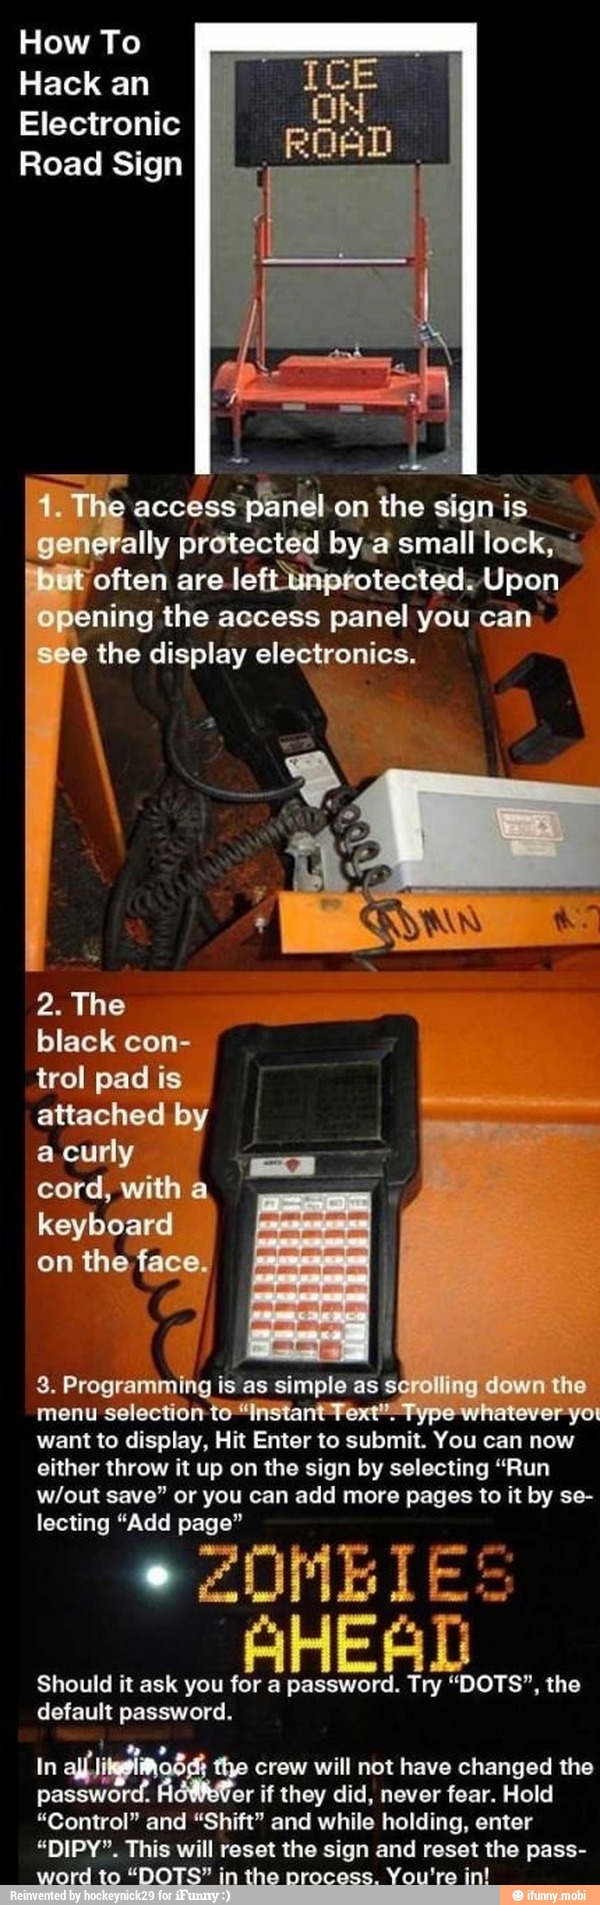 How To Hack An Electronic Road Sign Often Are Q Ii At Ning The Access Panel You Can The Display Electronics Ifunny